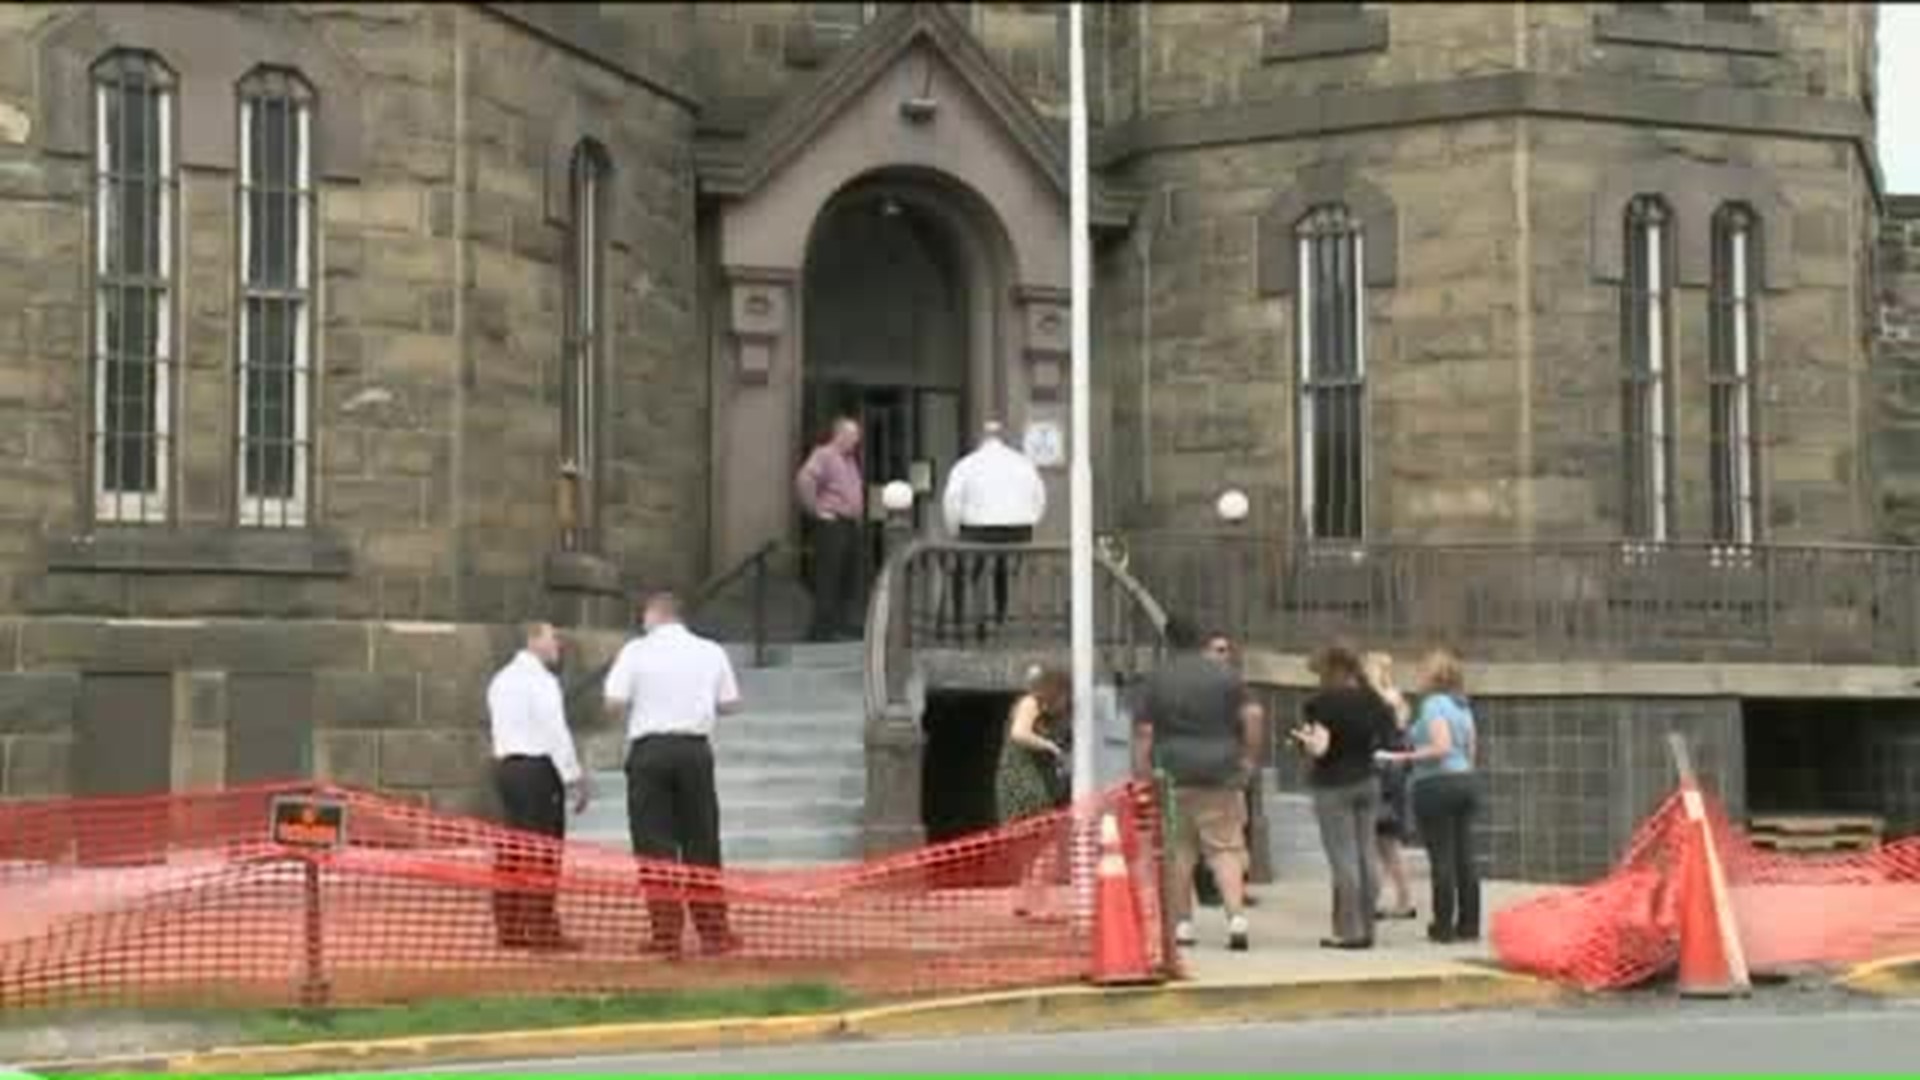 Northumberland County Prison Fire: One Year Later